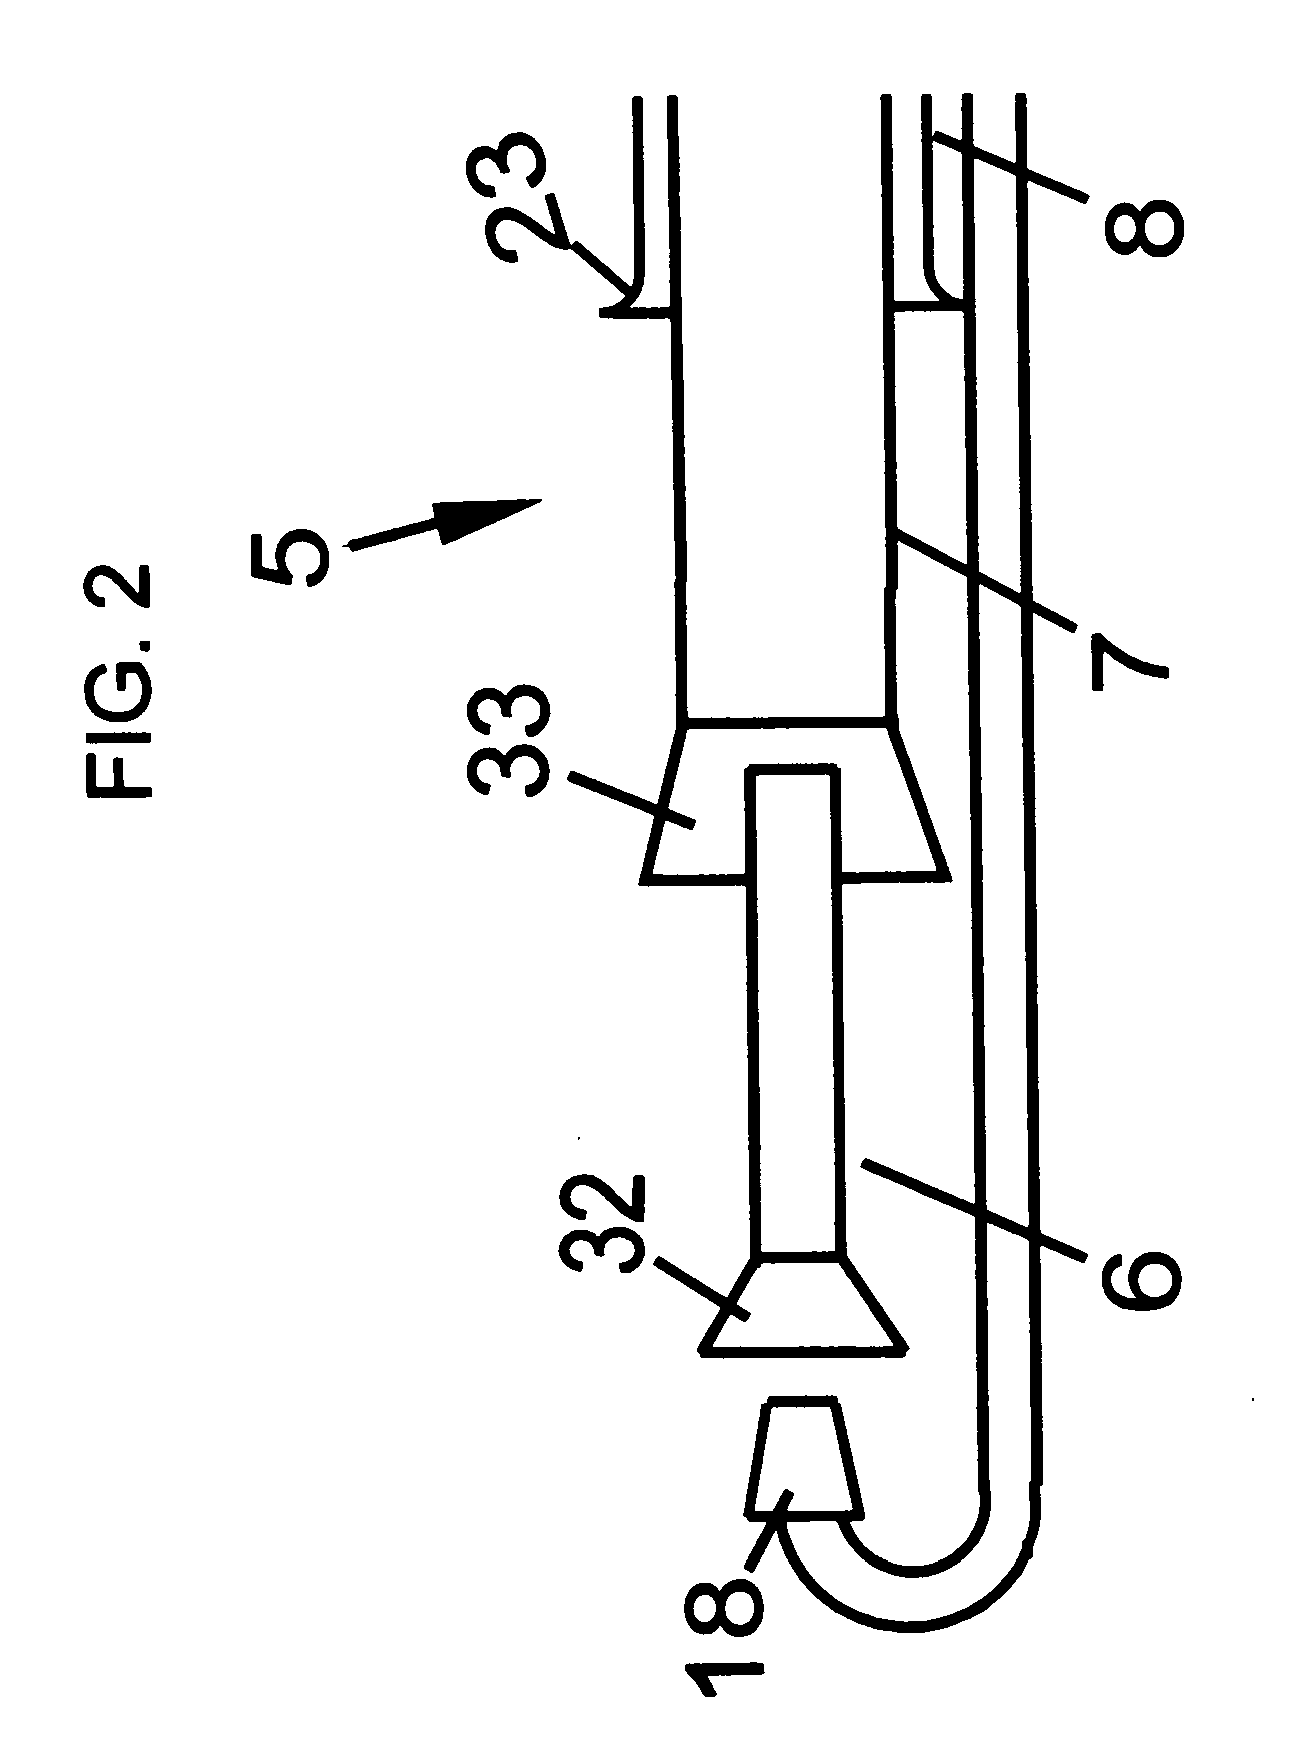 High static thrust valveless pulse-jet engine with forward-facing intake duct